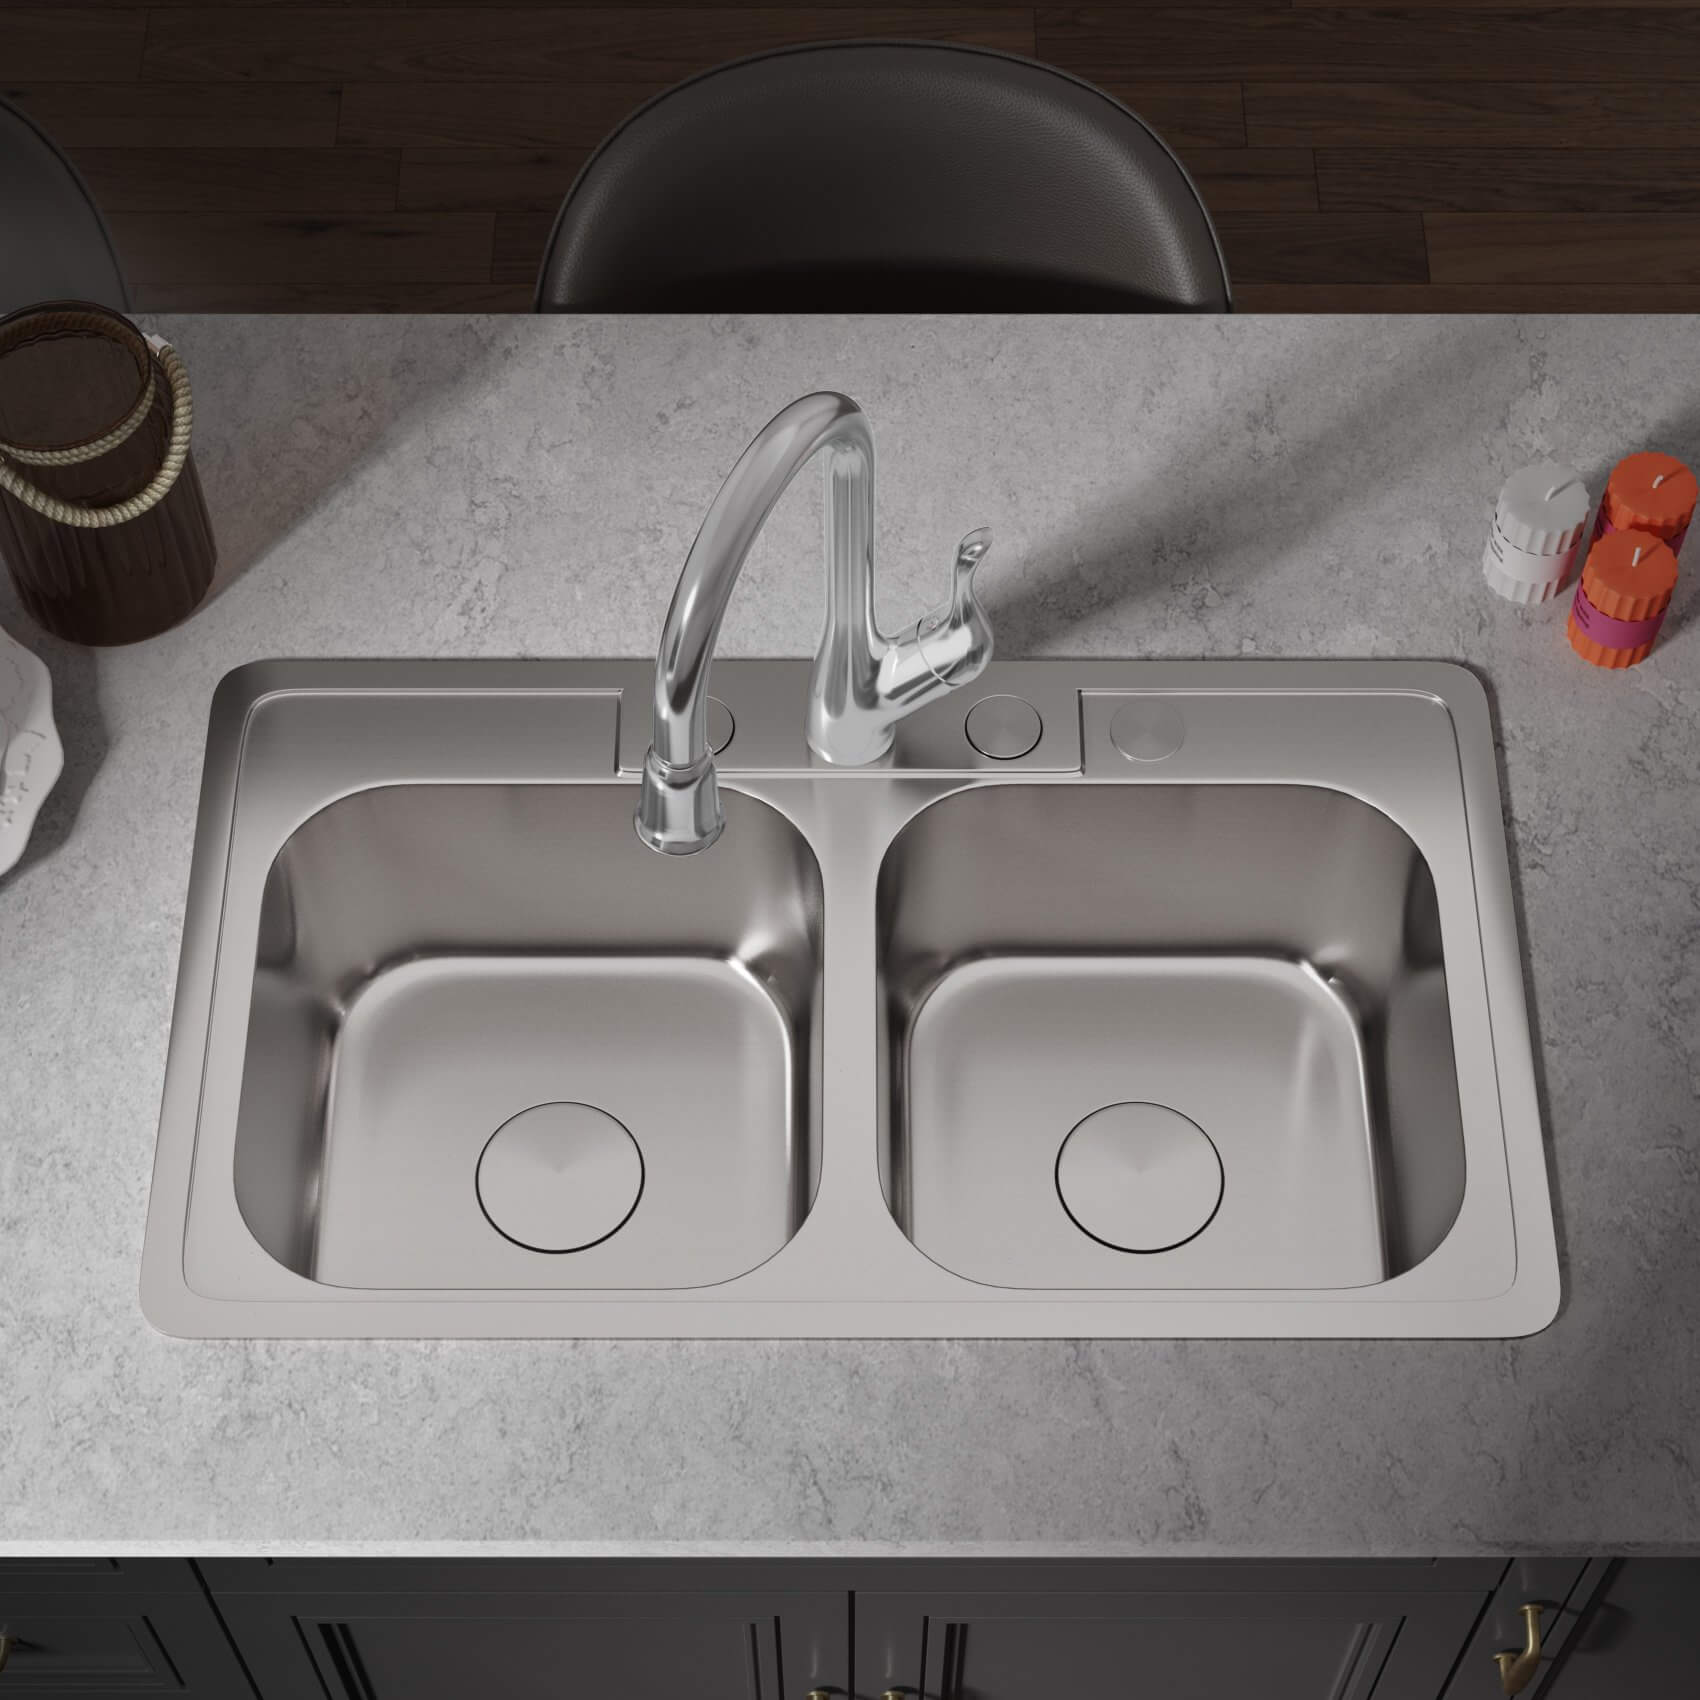 Single handle pull down kitchen faucet is mounted over kitchen sink